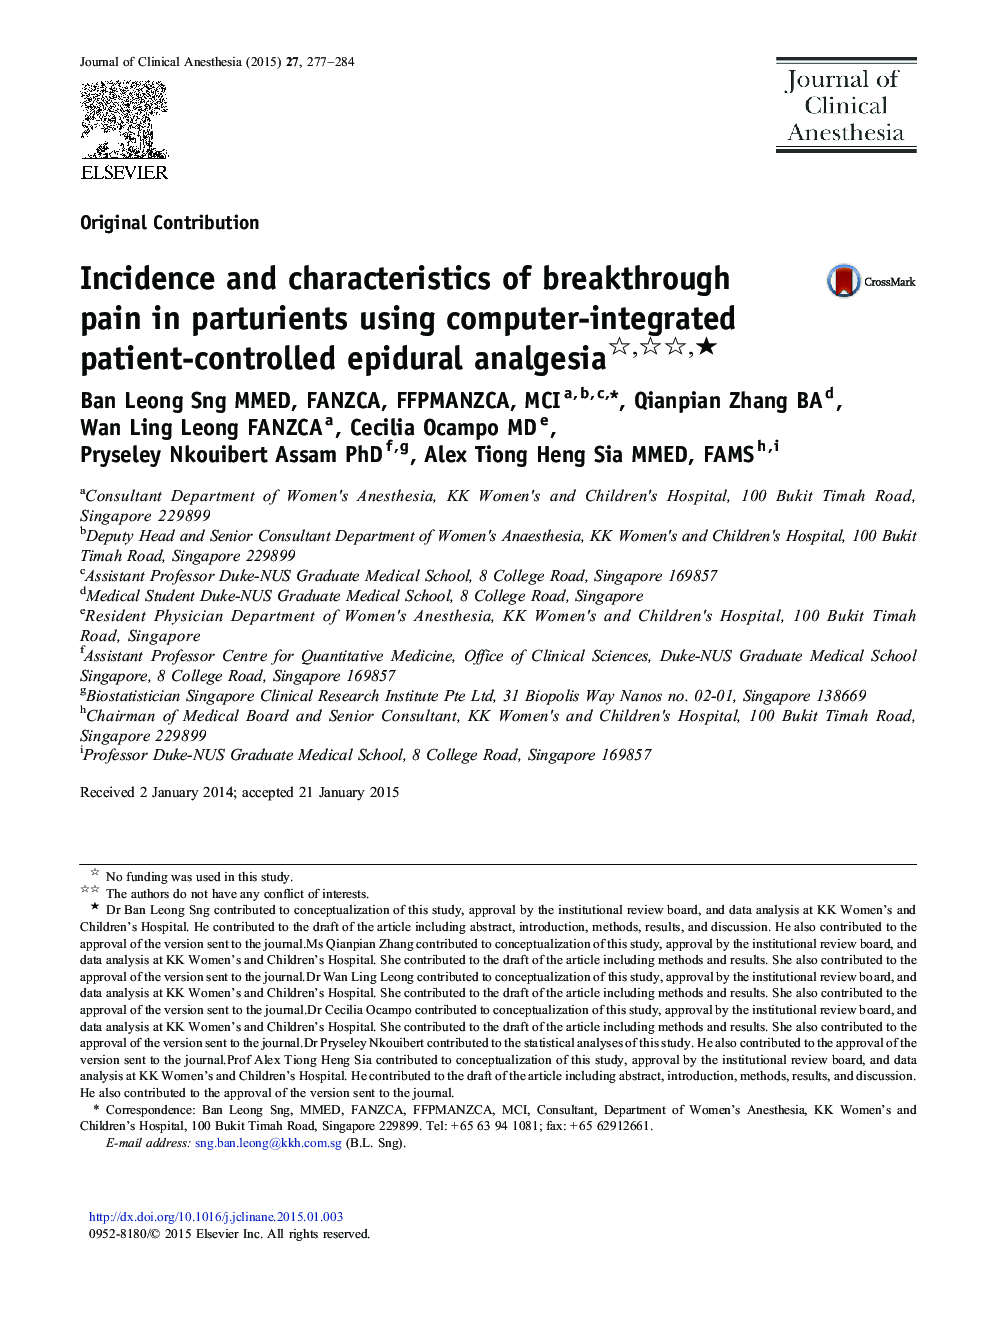 Incidence and characteristics of breakthrough pain in parturients using computer-integrated patient-controlled epidural analgesia ★